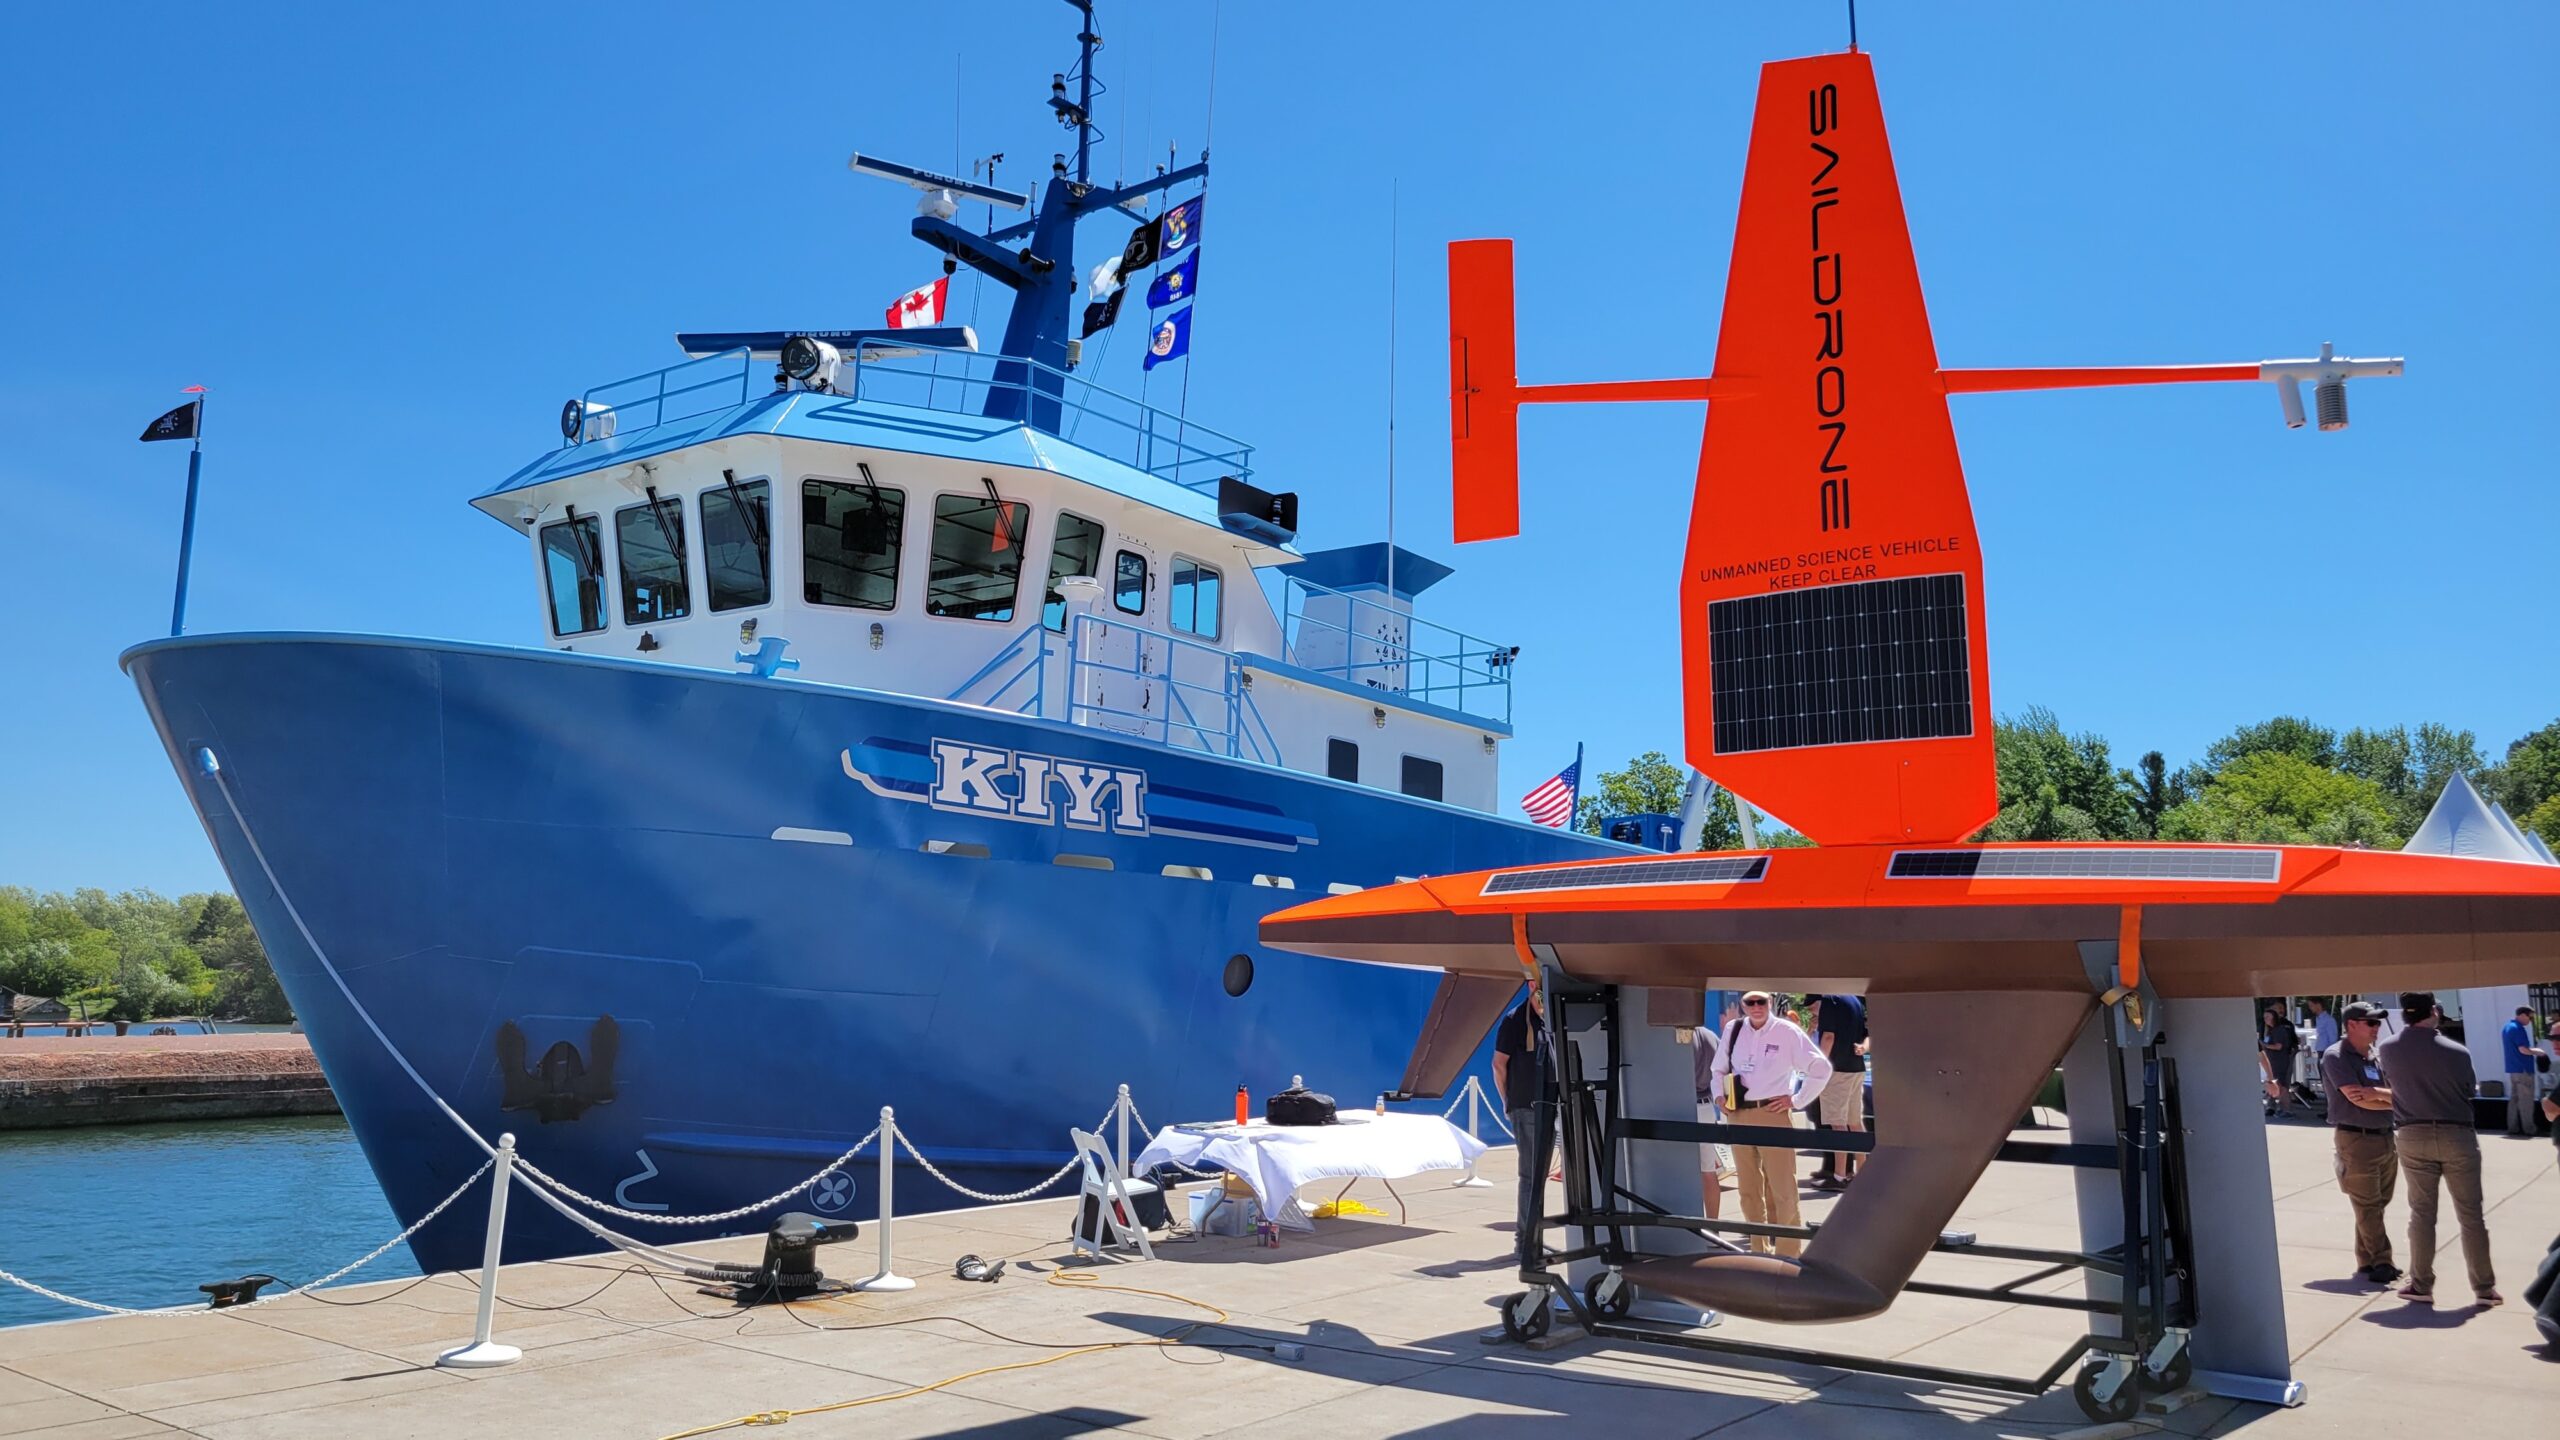 A sail drone stands on a dock next to the USGS research vessel Kiyi.